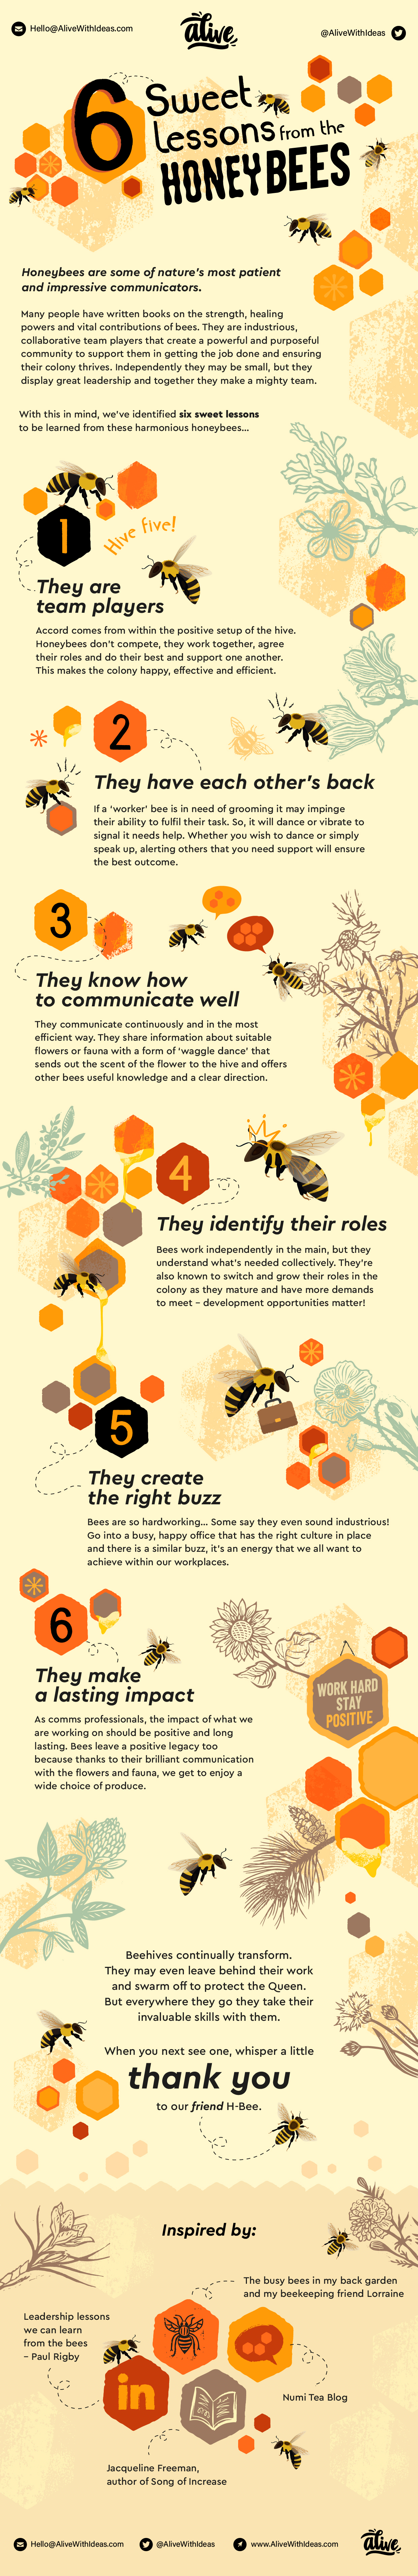 Bee inspired infographic with 6 lesson from the honeybees